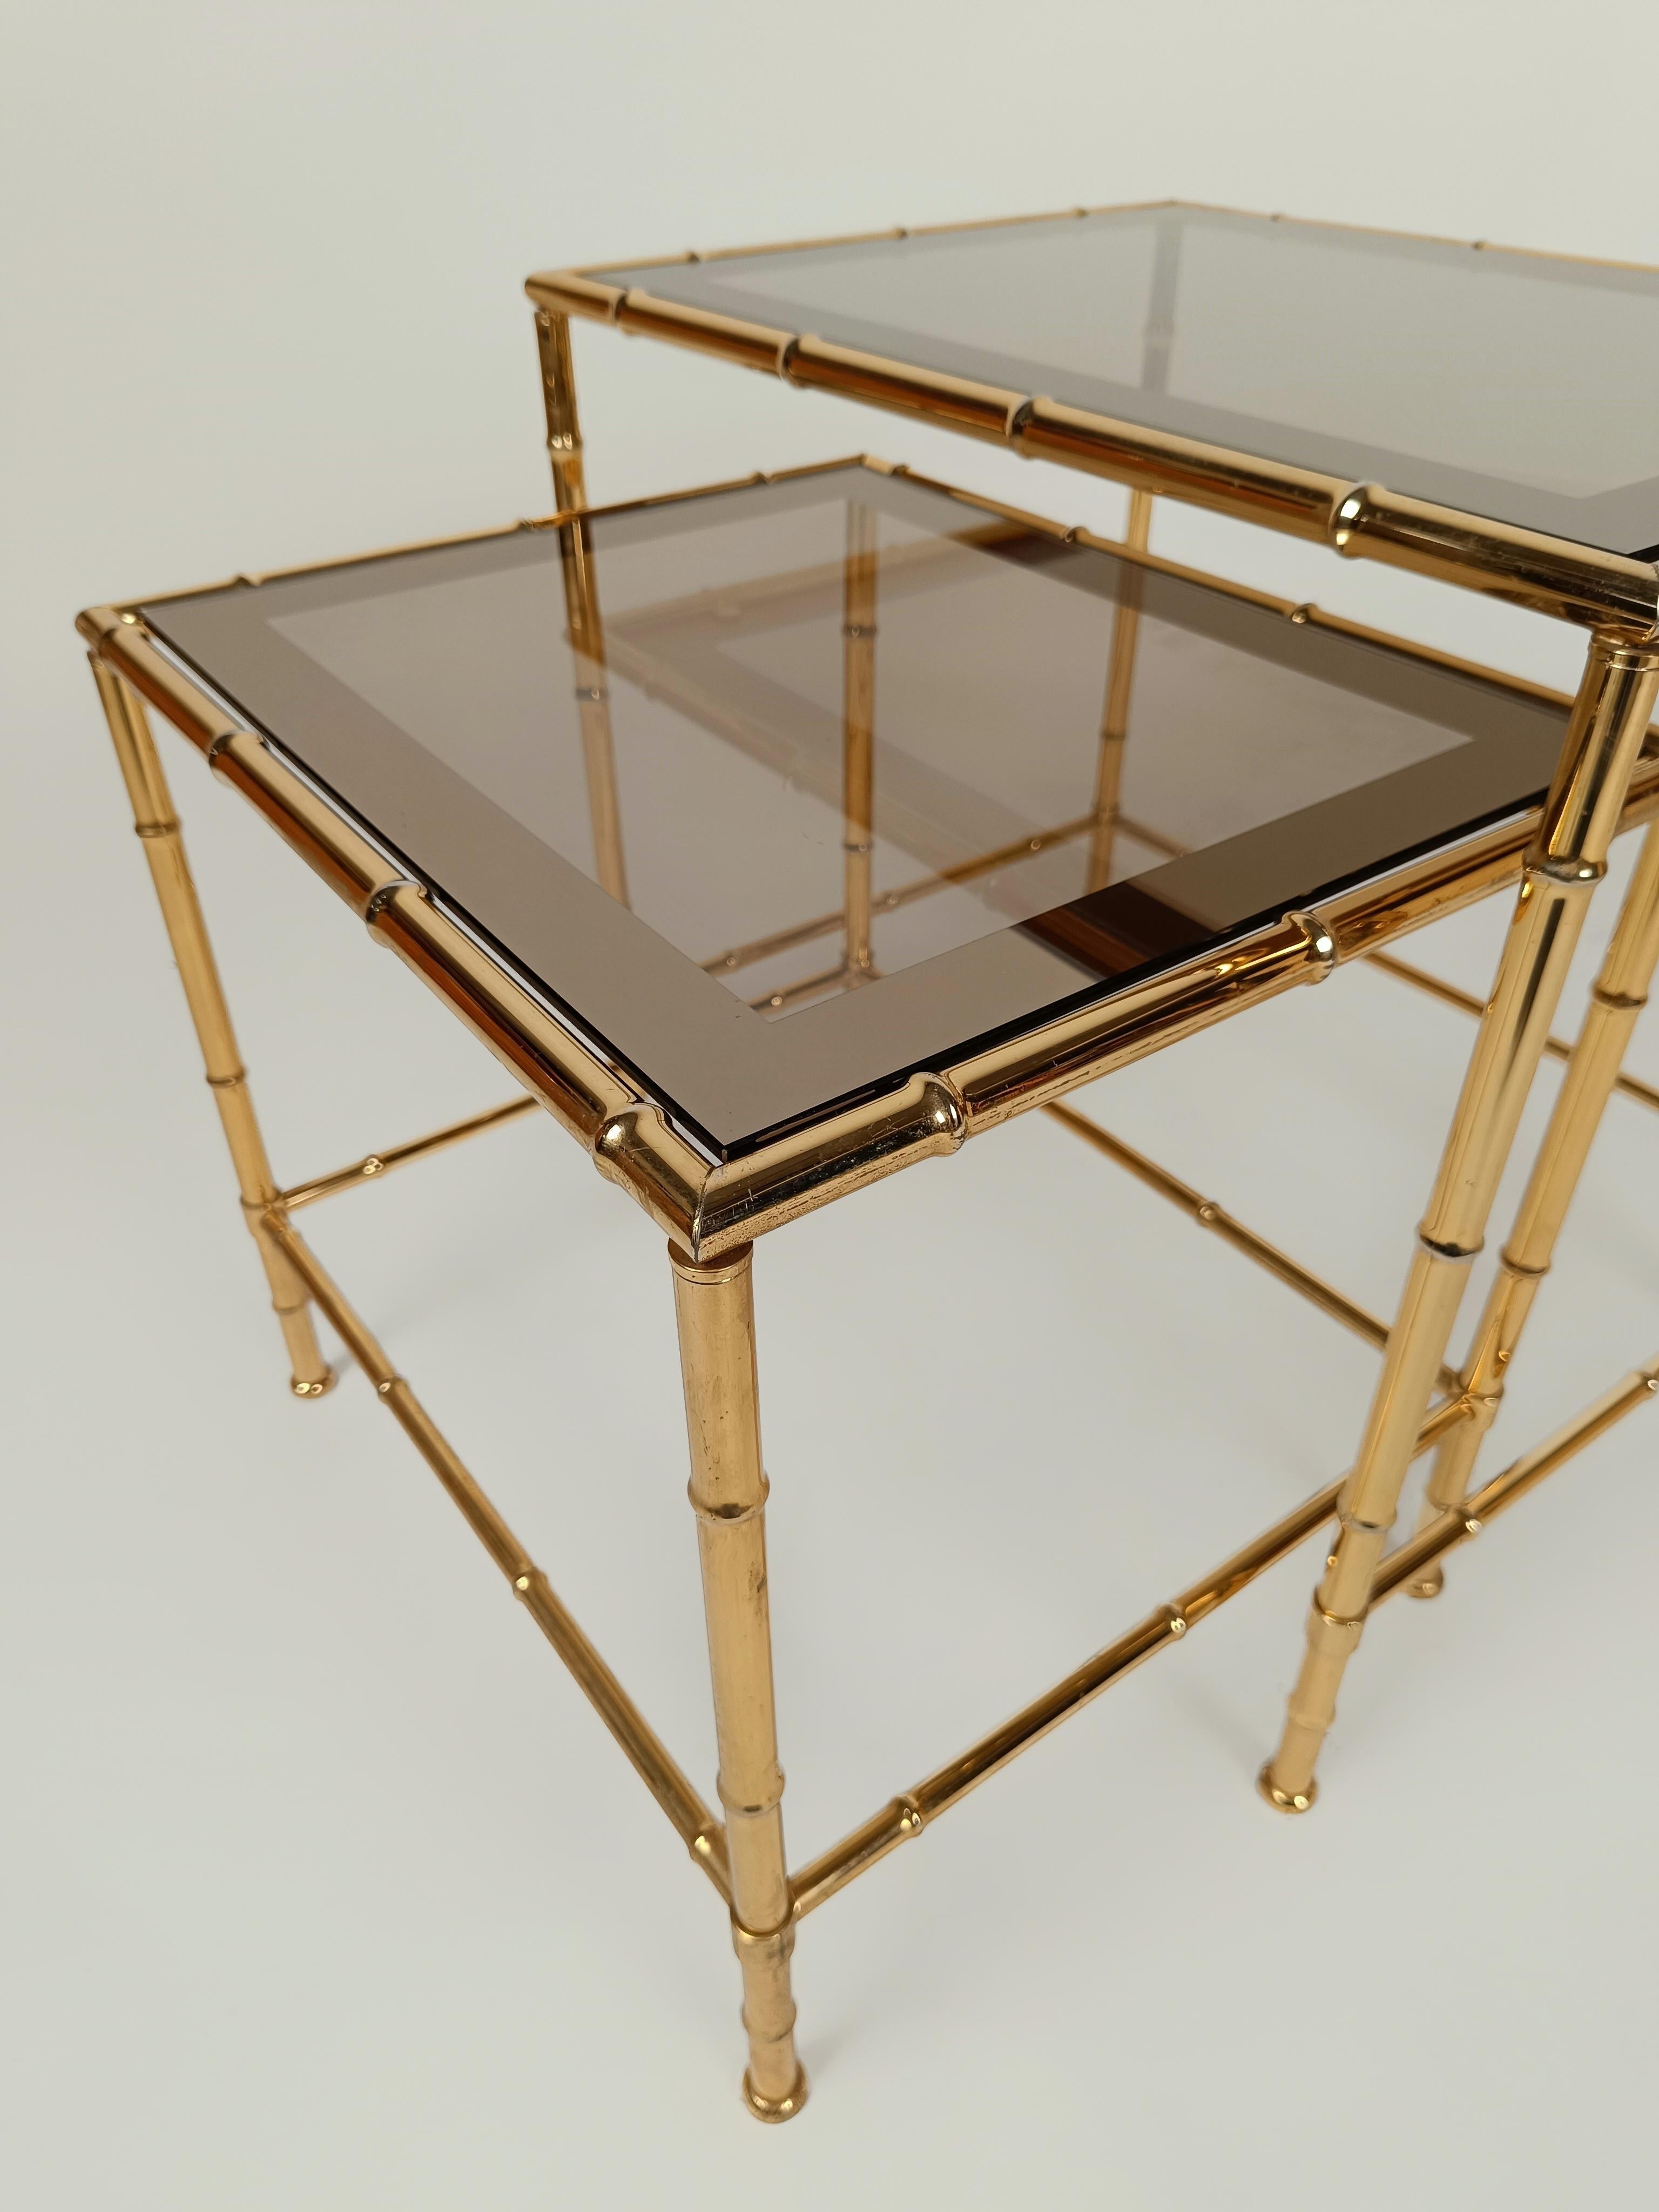 A beautiful set of 2 vintage brass faux bamboo nest of tables.
This stunning mid-modern century piece is probably made in Italy between the 1970s and the 1980s, in the style of the renowned and eminent design house of ‘Maisen Bagues’.
The brass